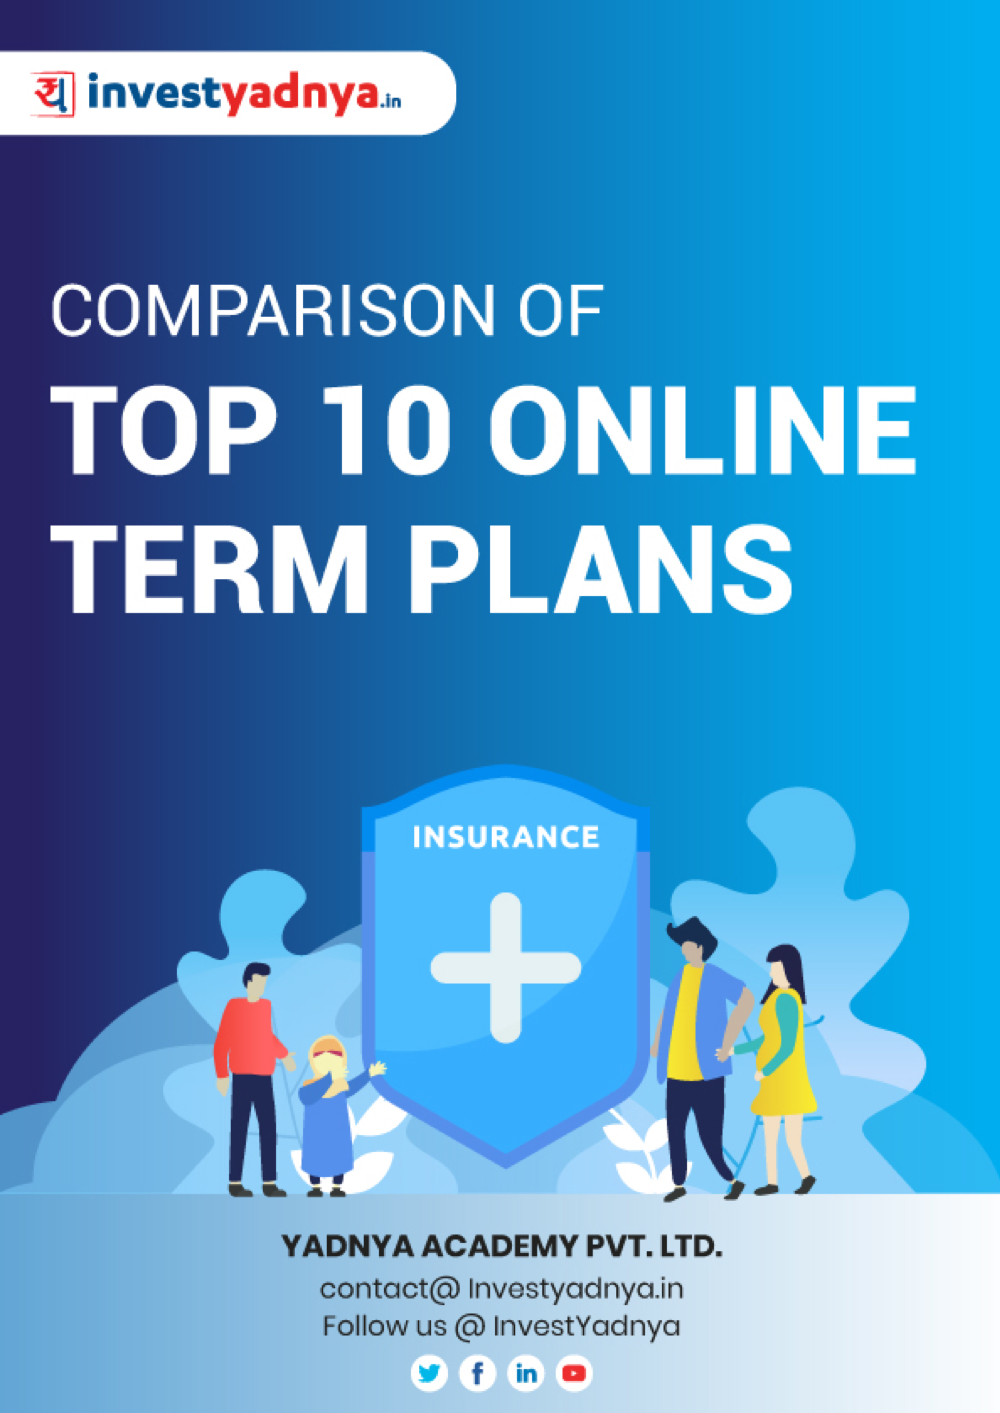 This ebook offers a detailed comparative analysis of 10 Online term insurance plans based on multiple parameters - company type, premium cost, etc. It provides ratings & review of the respective plans. ✔ Detailed Research ✔ Quality Reports